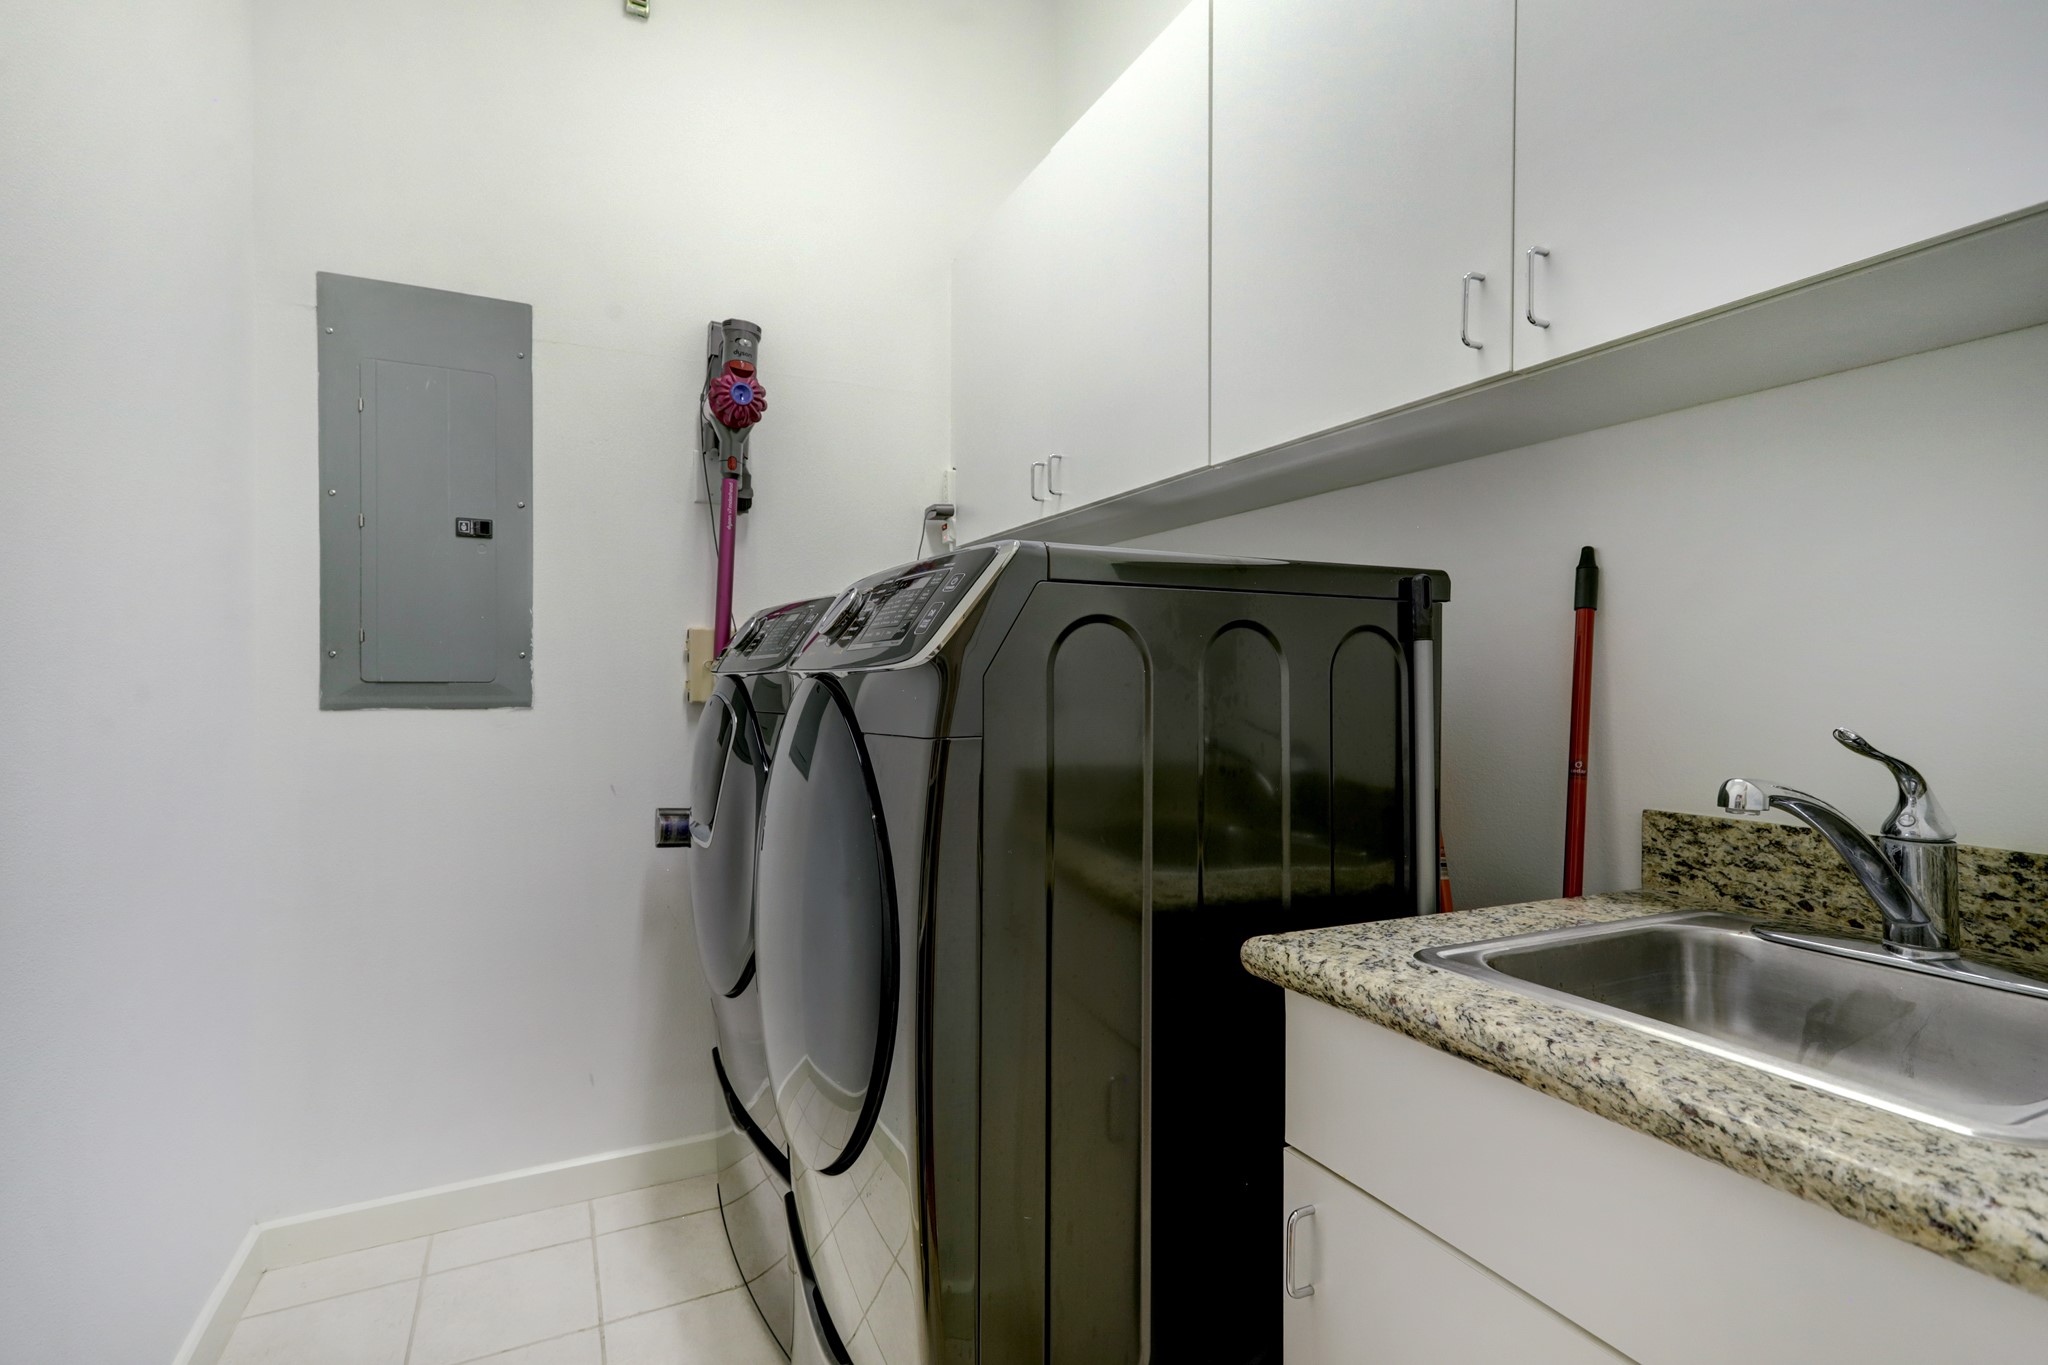 Laundry room in the unit with sink and extra storage.